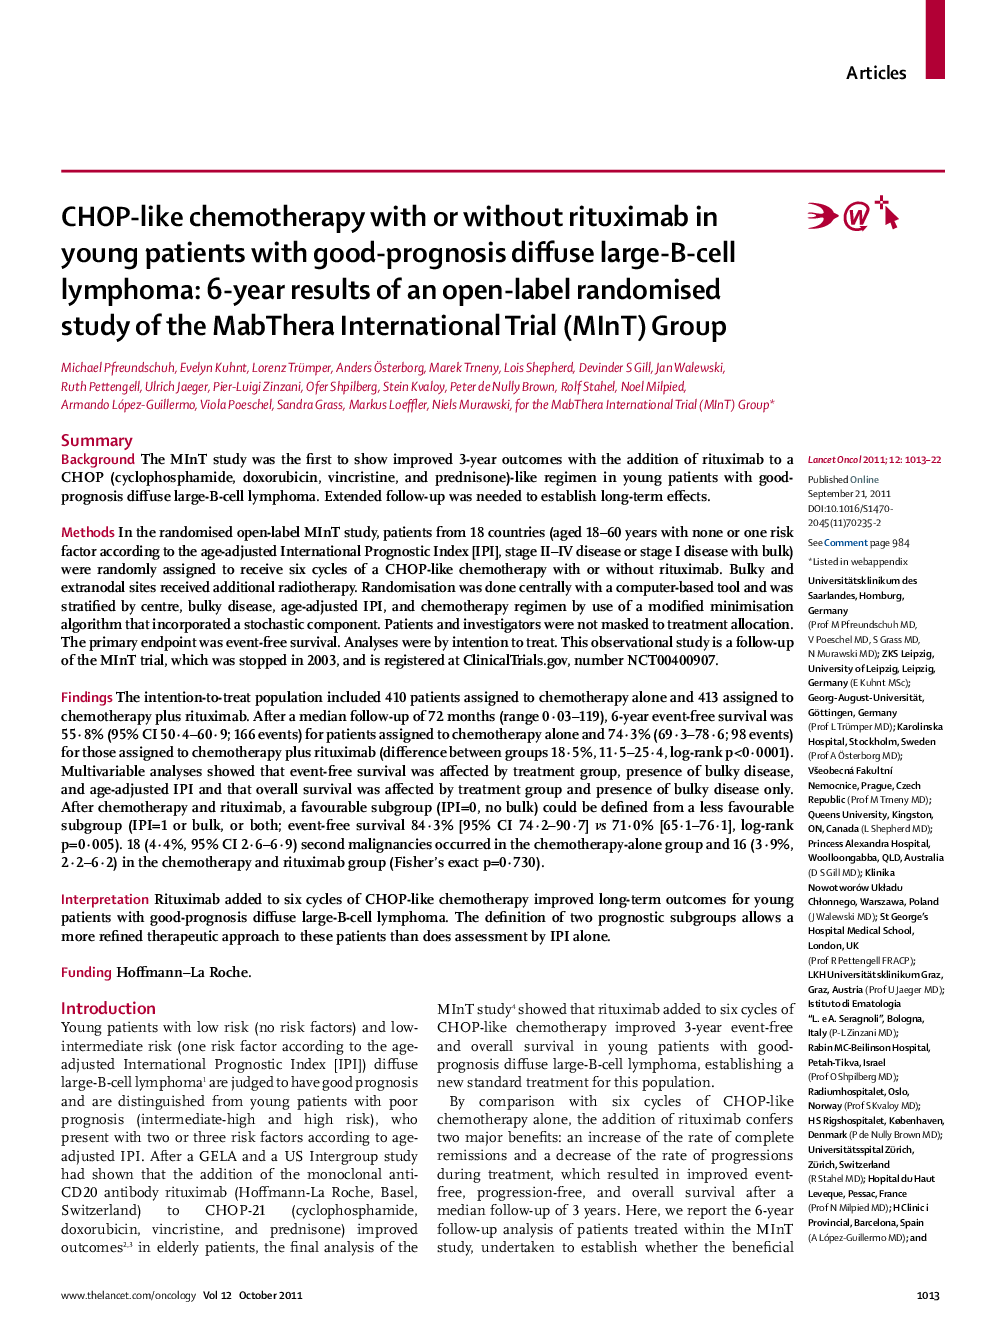 CHOP-like chemotherapy with or without rituximab in young patients with good-prognosis diffuse large-B-cell lymphoma: 6-year results of an open-label randomised study of the MabThera International Trial (MInT) Group